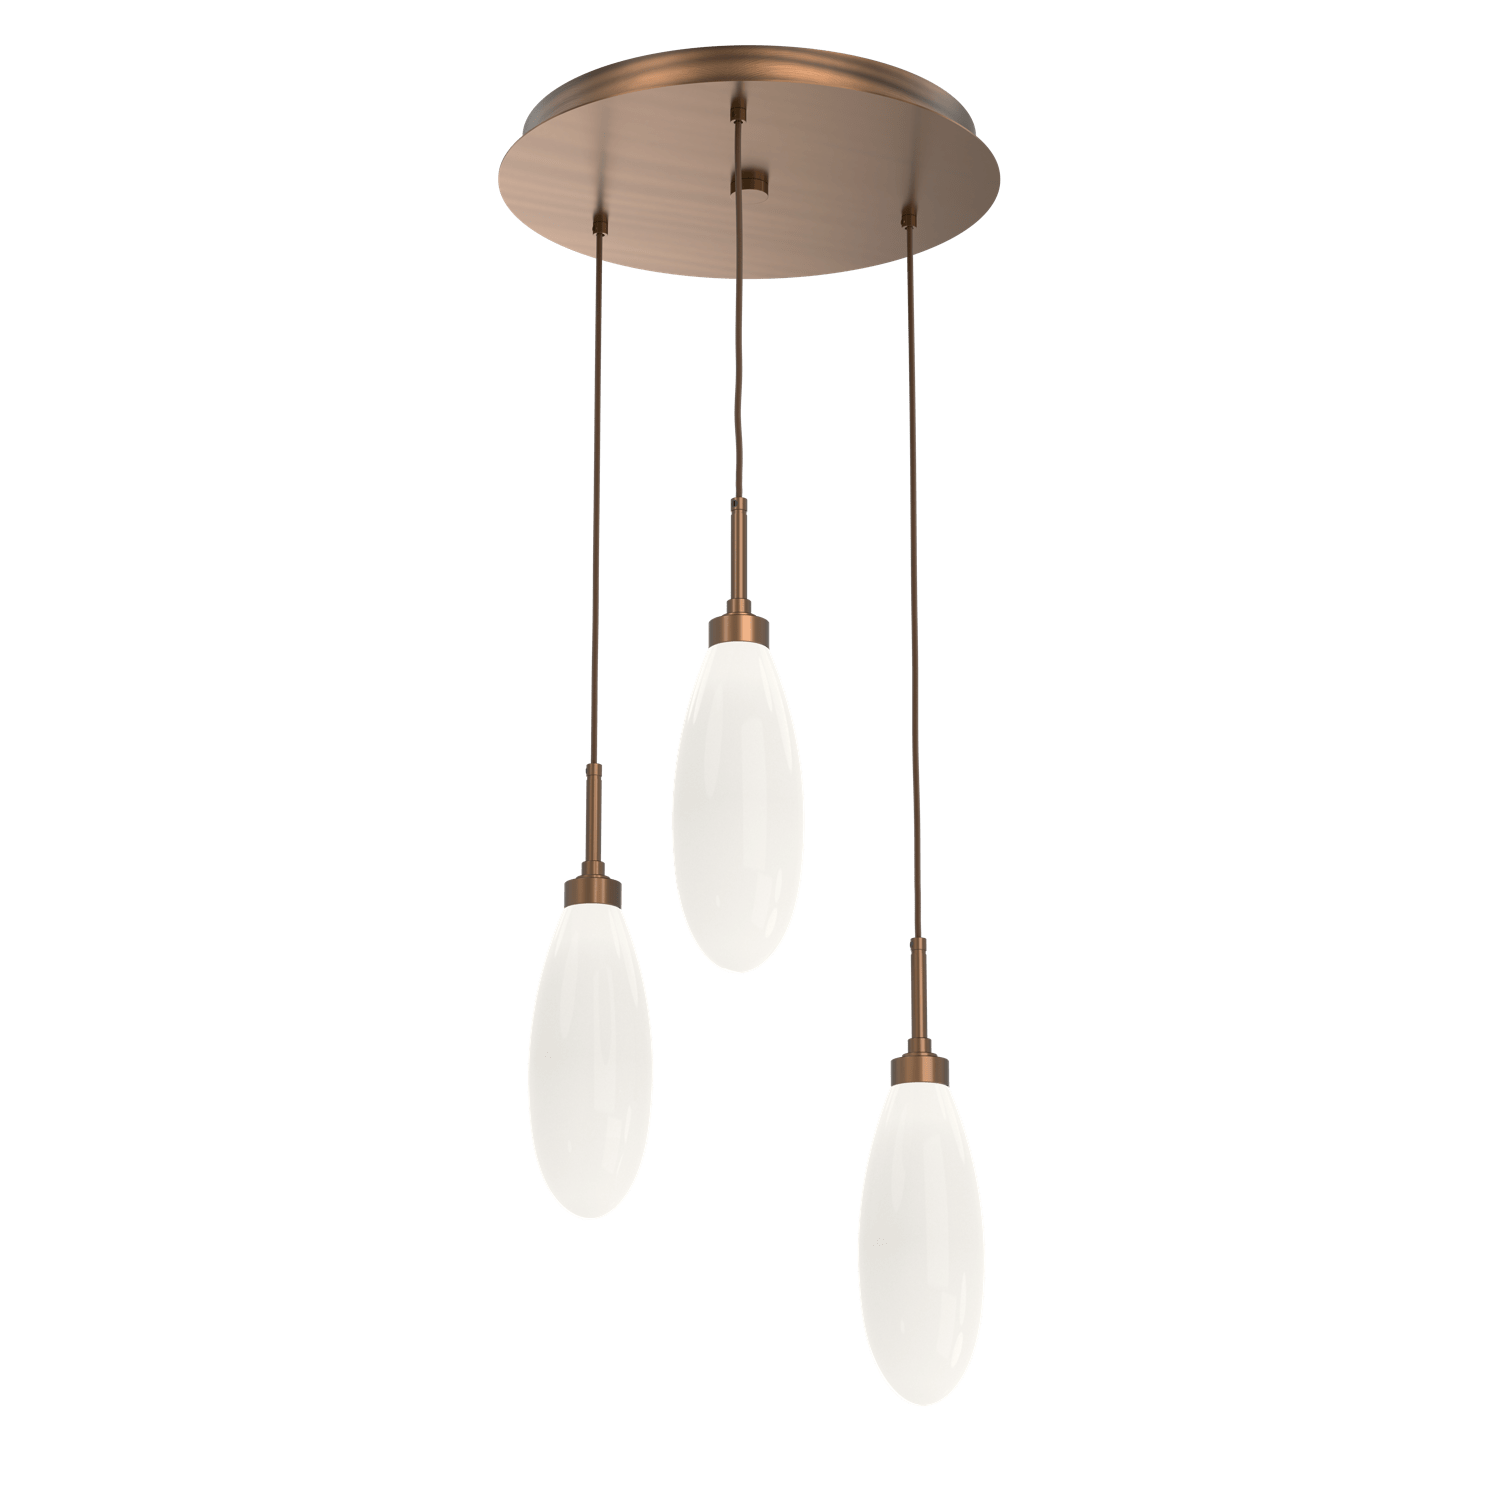 CHB0071-03-RB-WL-LL-Hammerton-Studio-Fiori-3-light-round-pendant-chandelier-with-oil-rubbed-bronze-finish-and-opal-white-glass-shades-and-LED-lamping